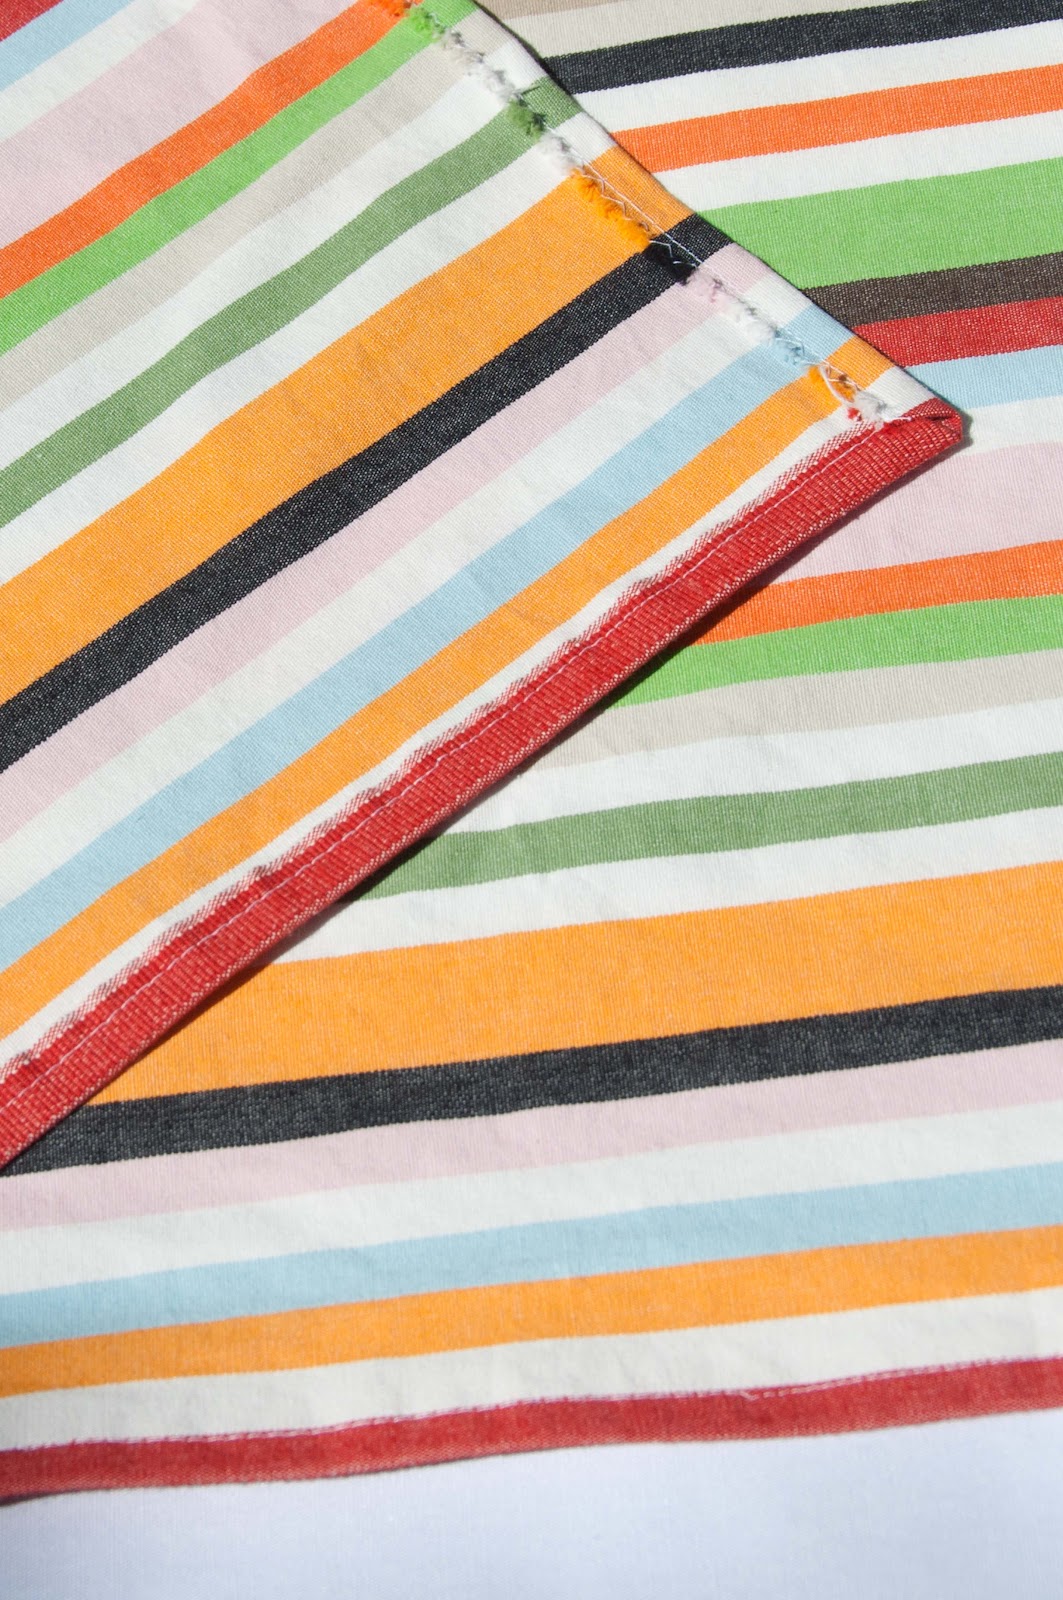 Aesthetic Nest: Sewing: Quick Mitered Table Runner (Tutorial)